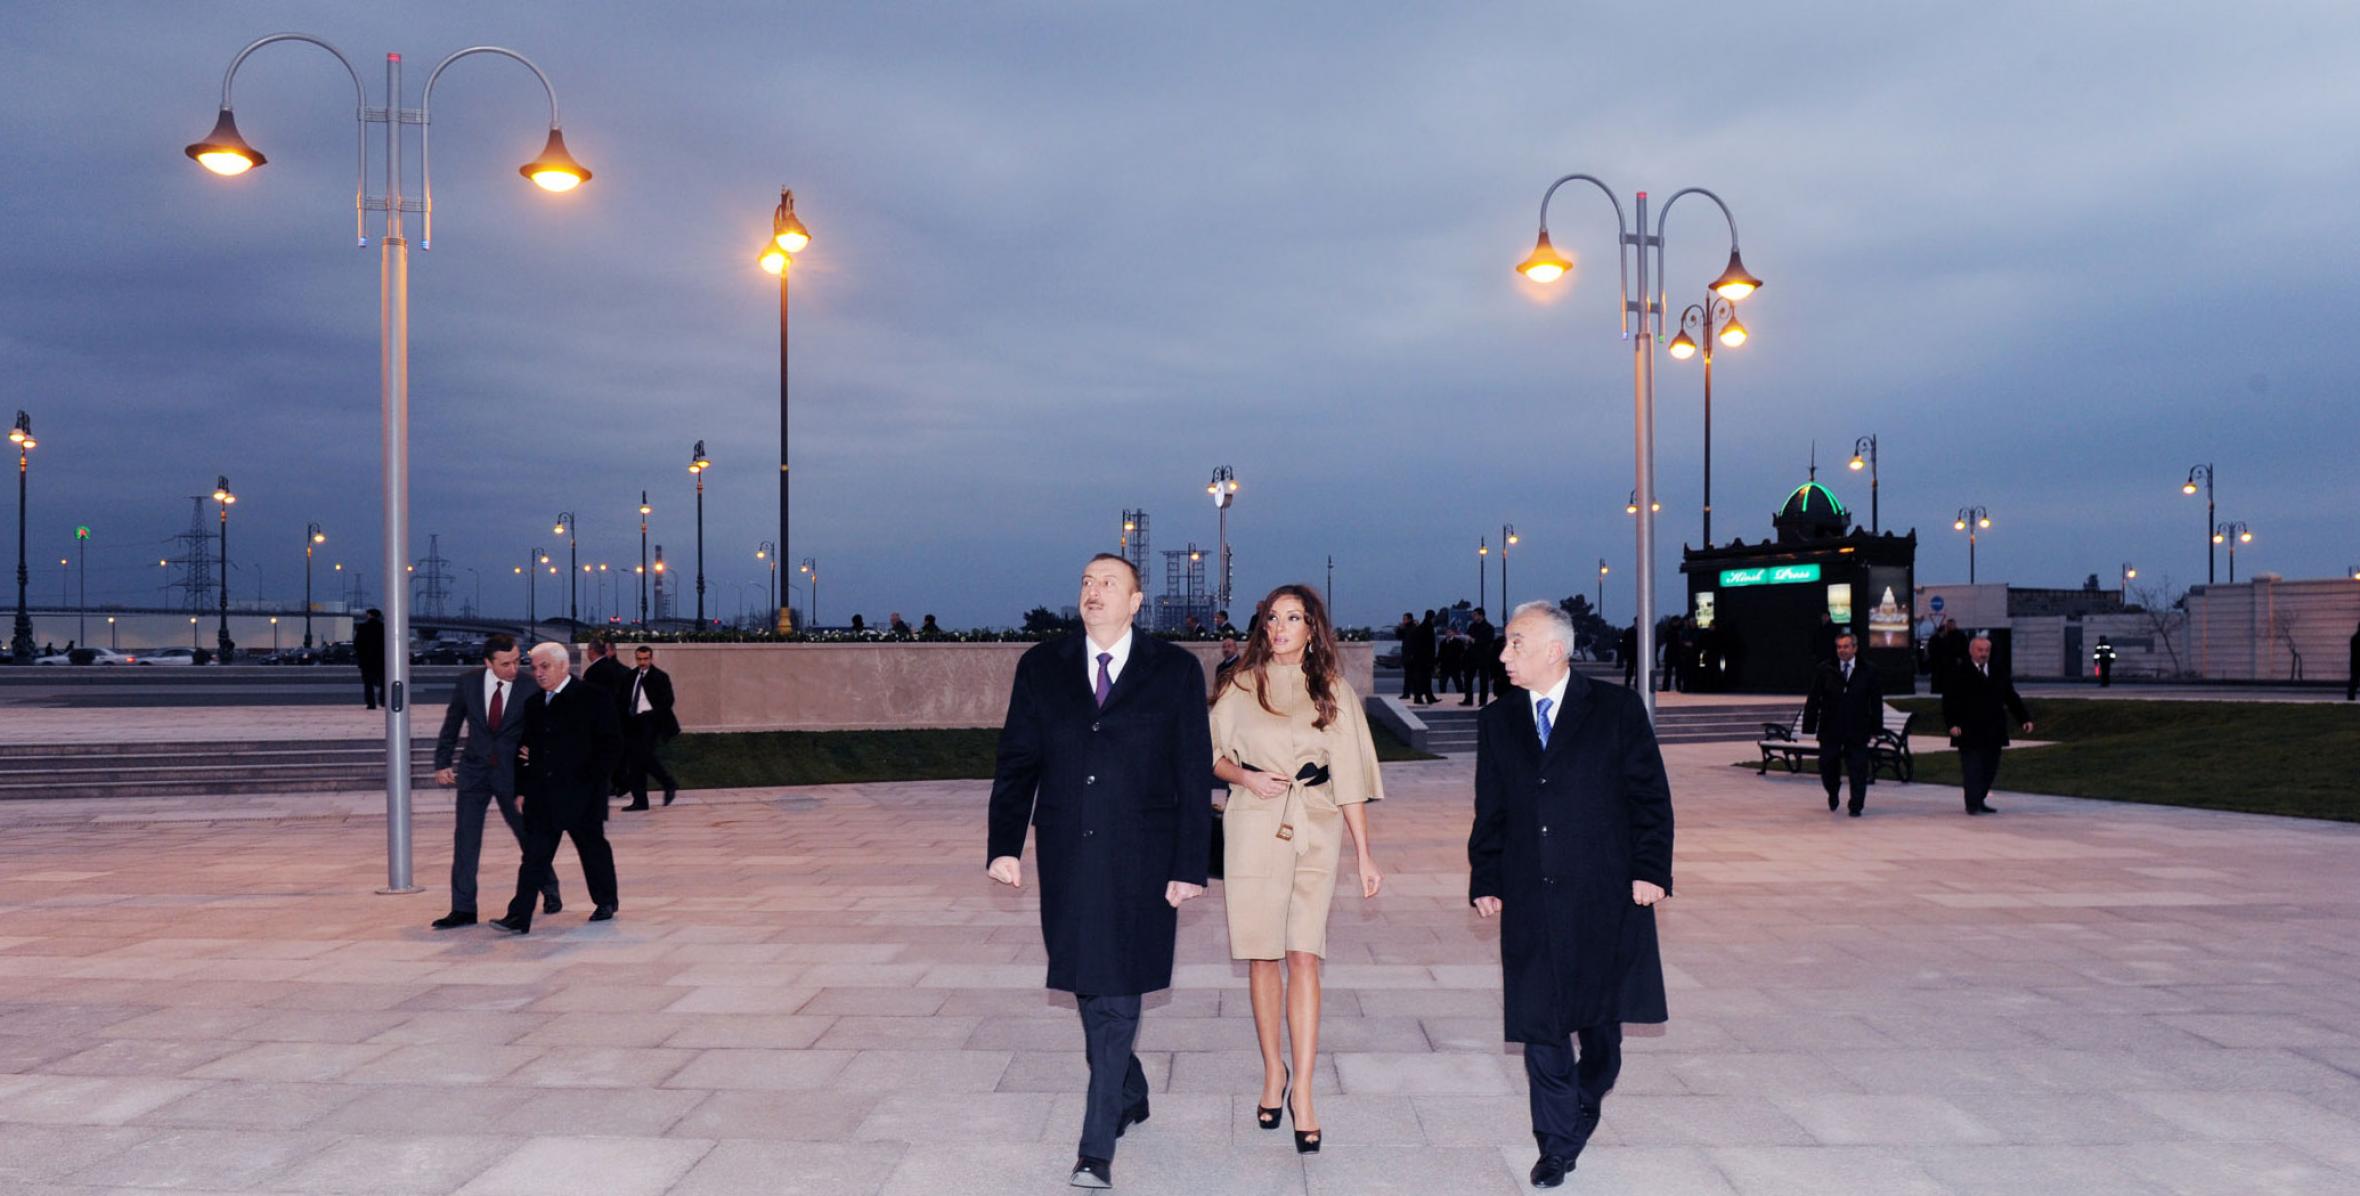 Ilham Aliyev attended the opening of a park and music and fire fountain in the Heydar Aliyev Avenue of Baku